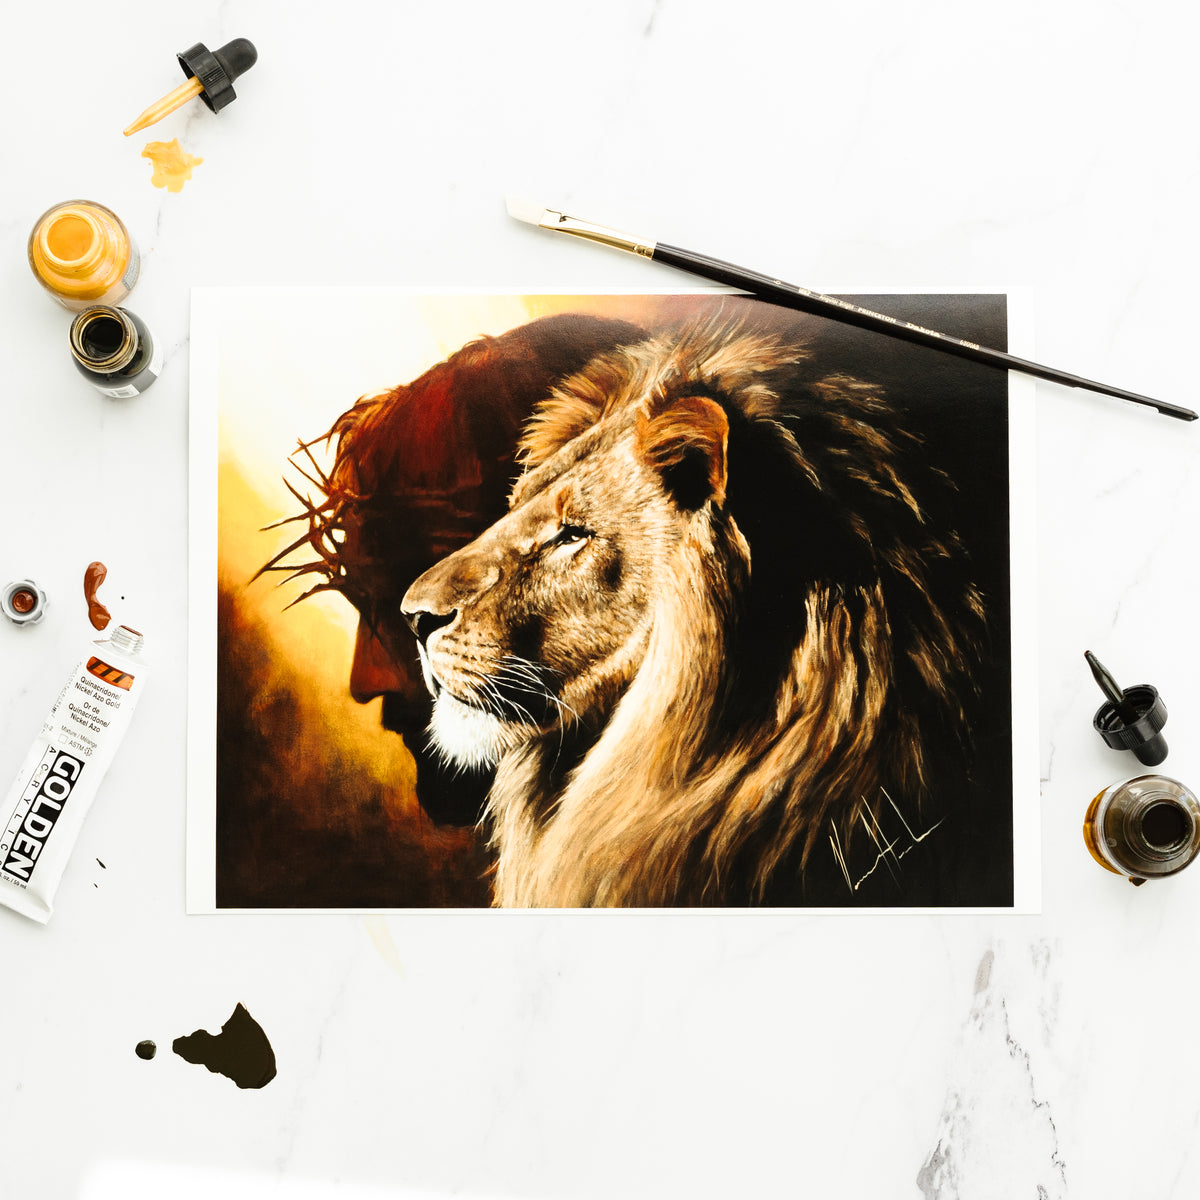 The Lion of Judah Painting with paint materials around it